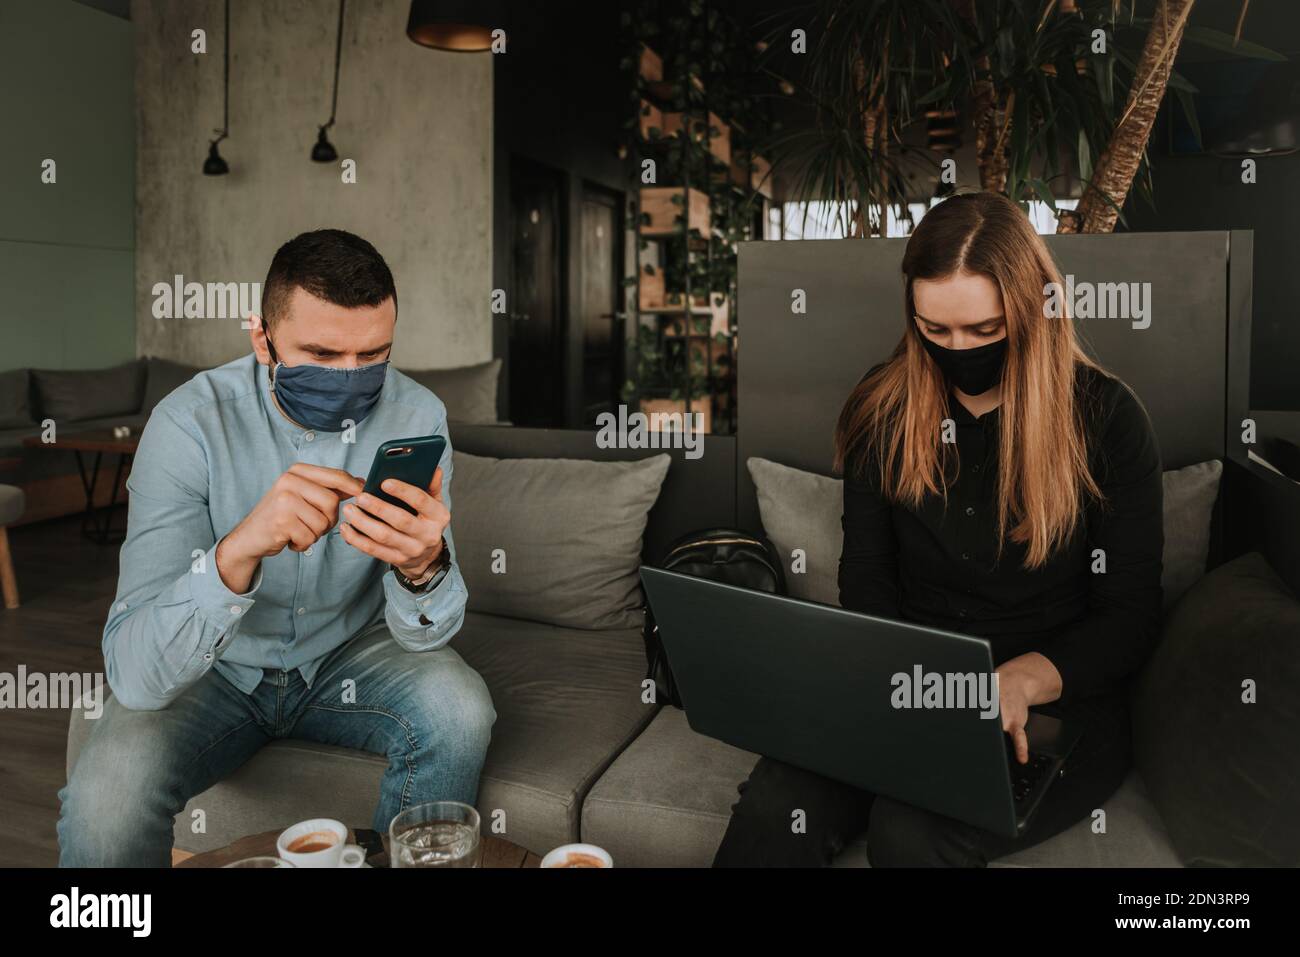 people with face mask using laptop and smartphone technology indoors Stock Photo